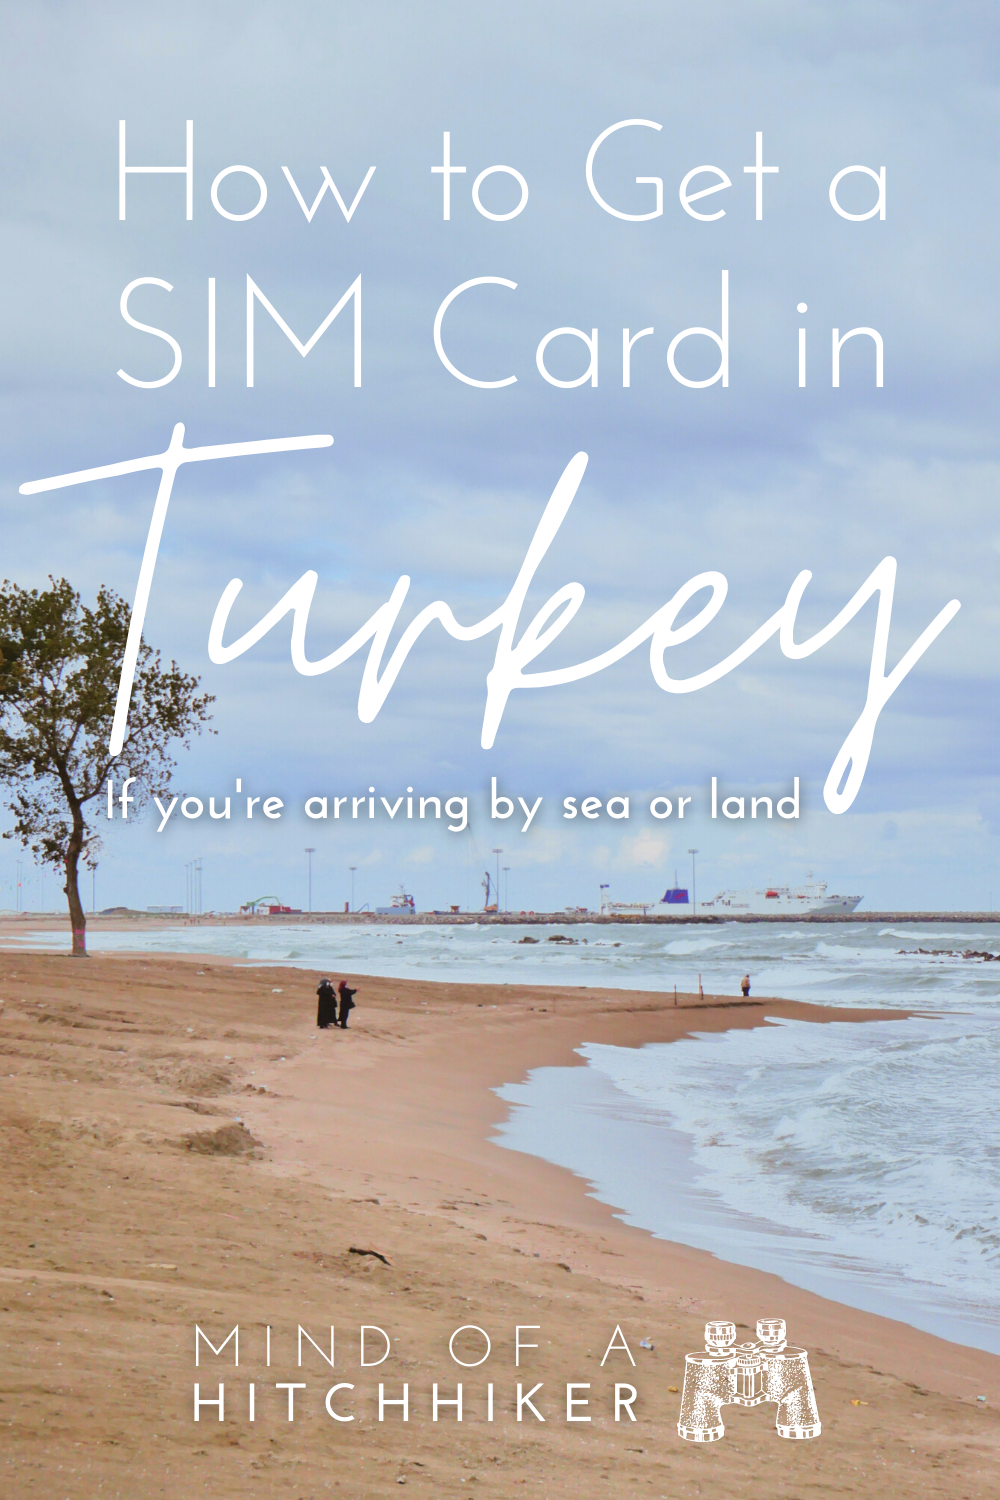 How to get a Turkish SIM card pin